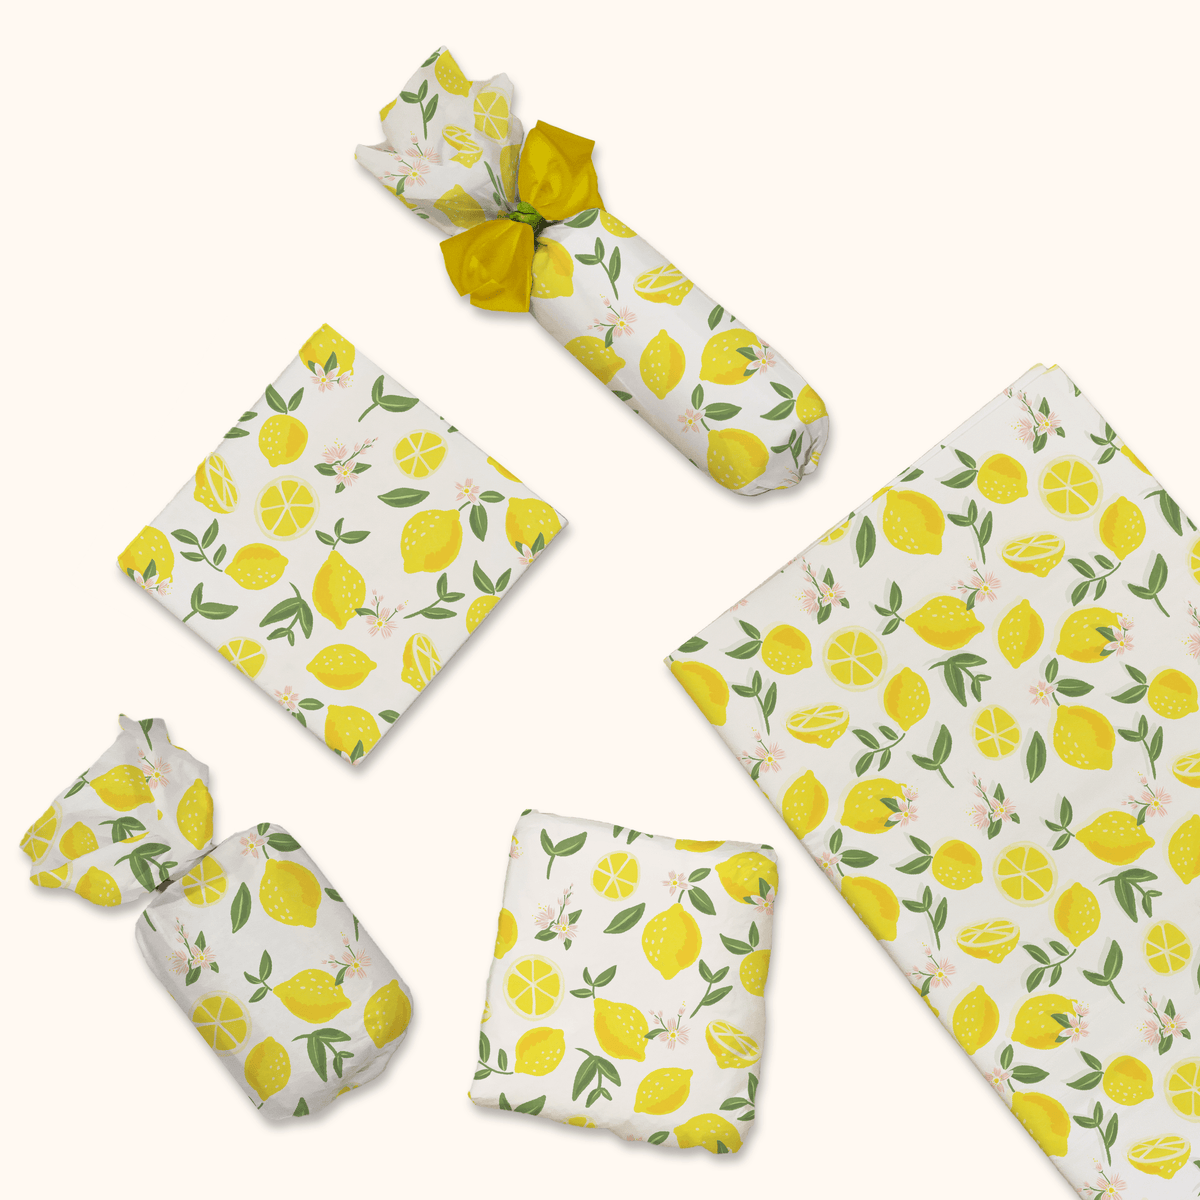 Lemon print tissue wrapping paper pro supply global